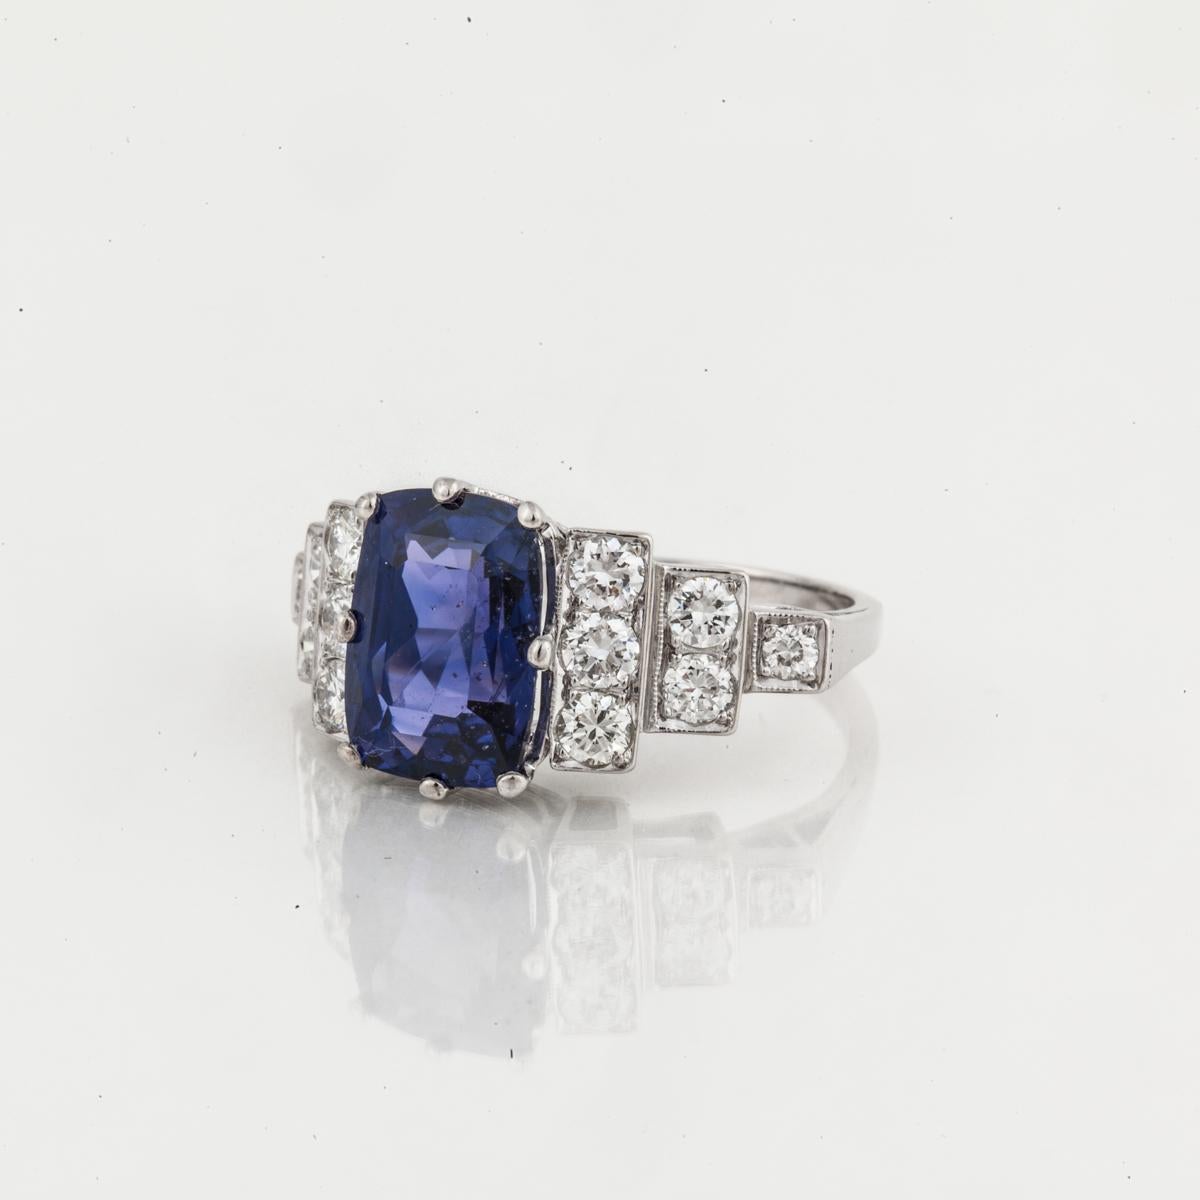 Cushion Cut AGL certified Color-Changing Ceylon Sapphire and Diamond Ring in Platinum